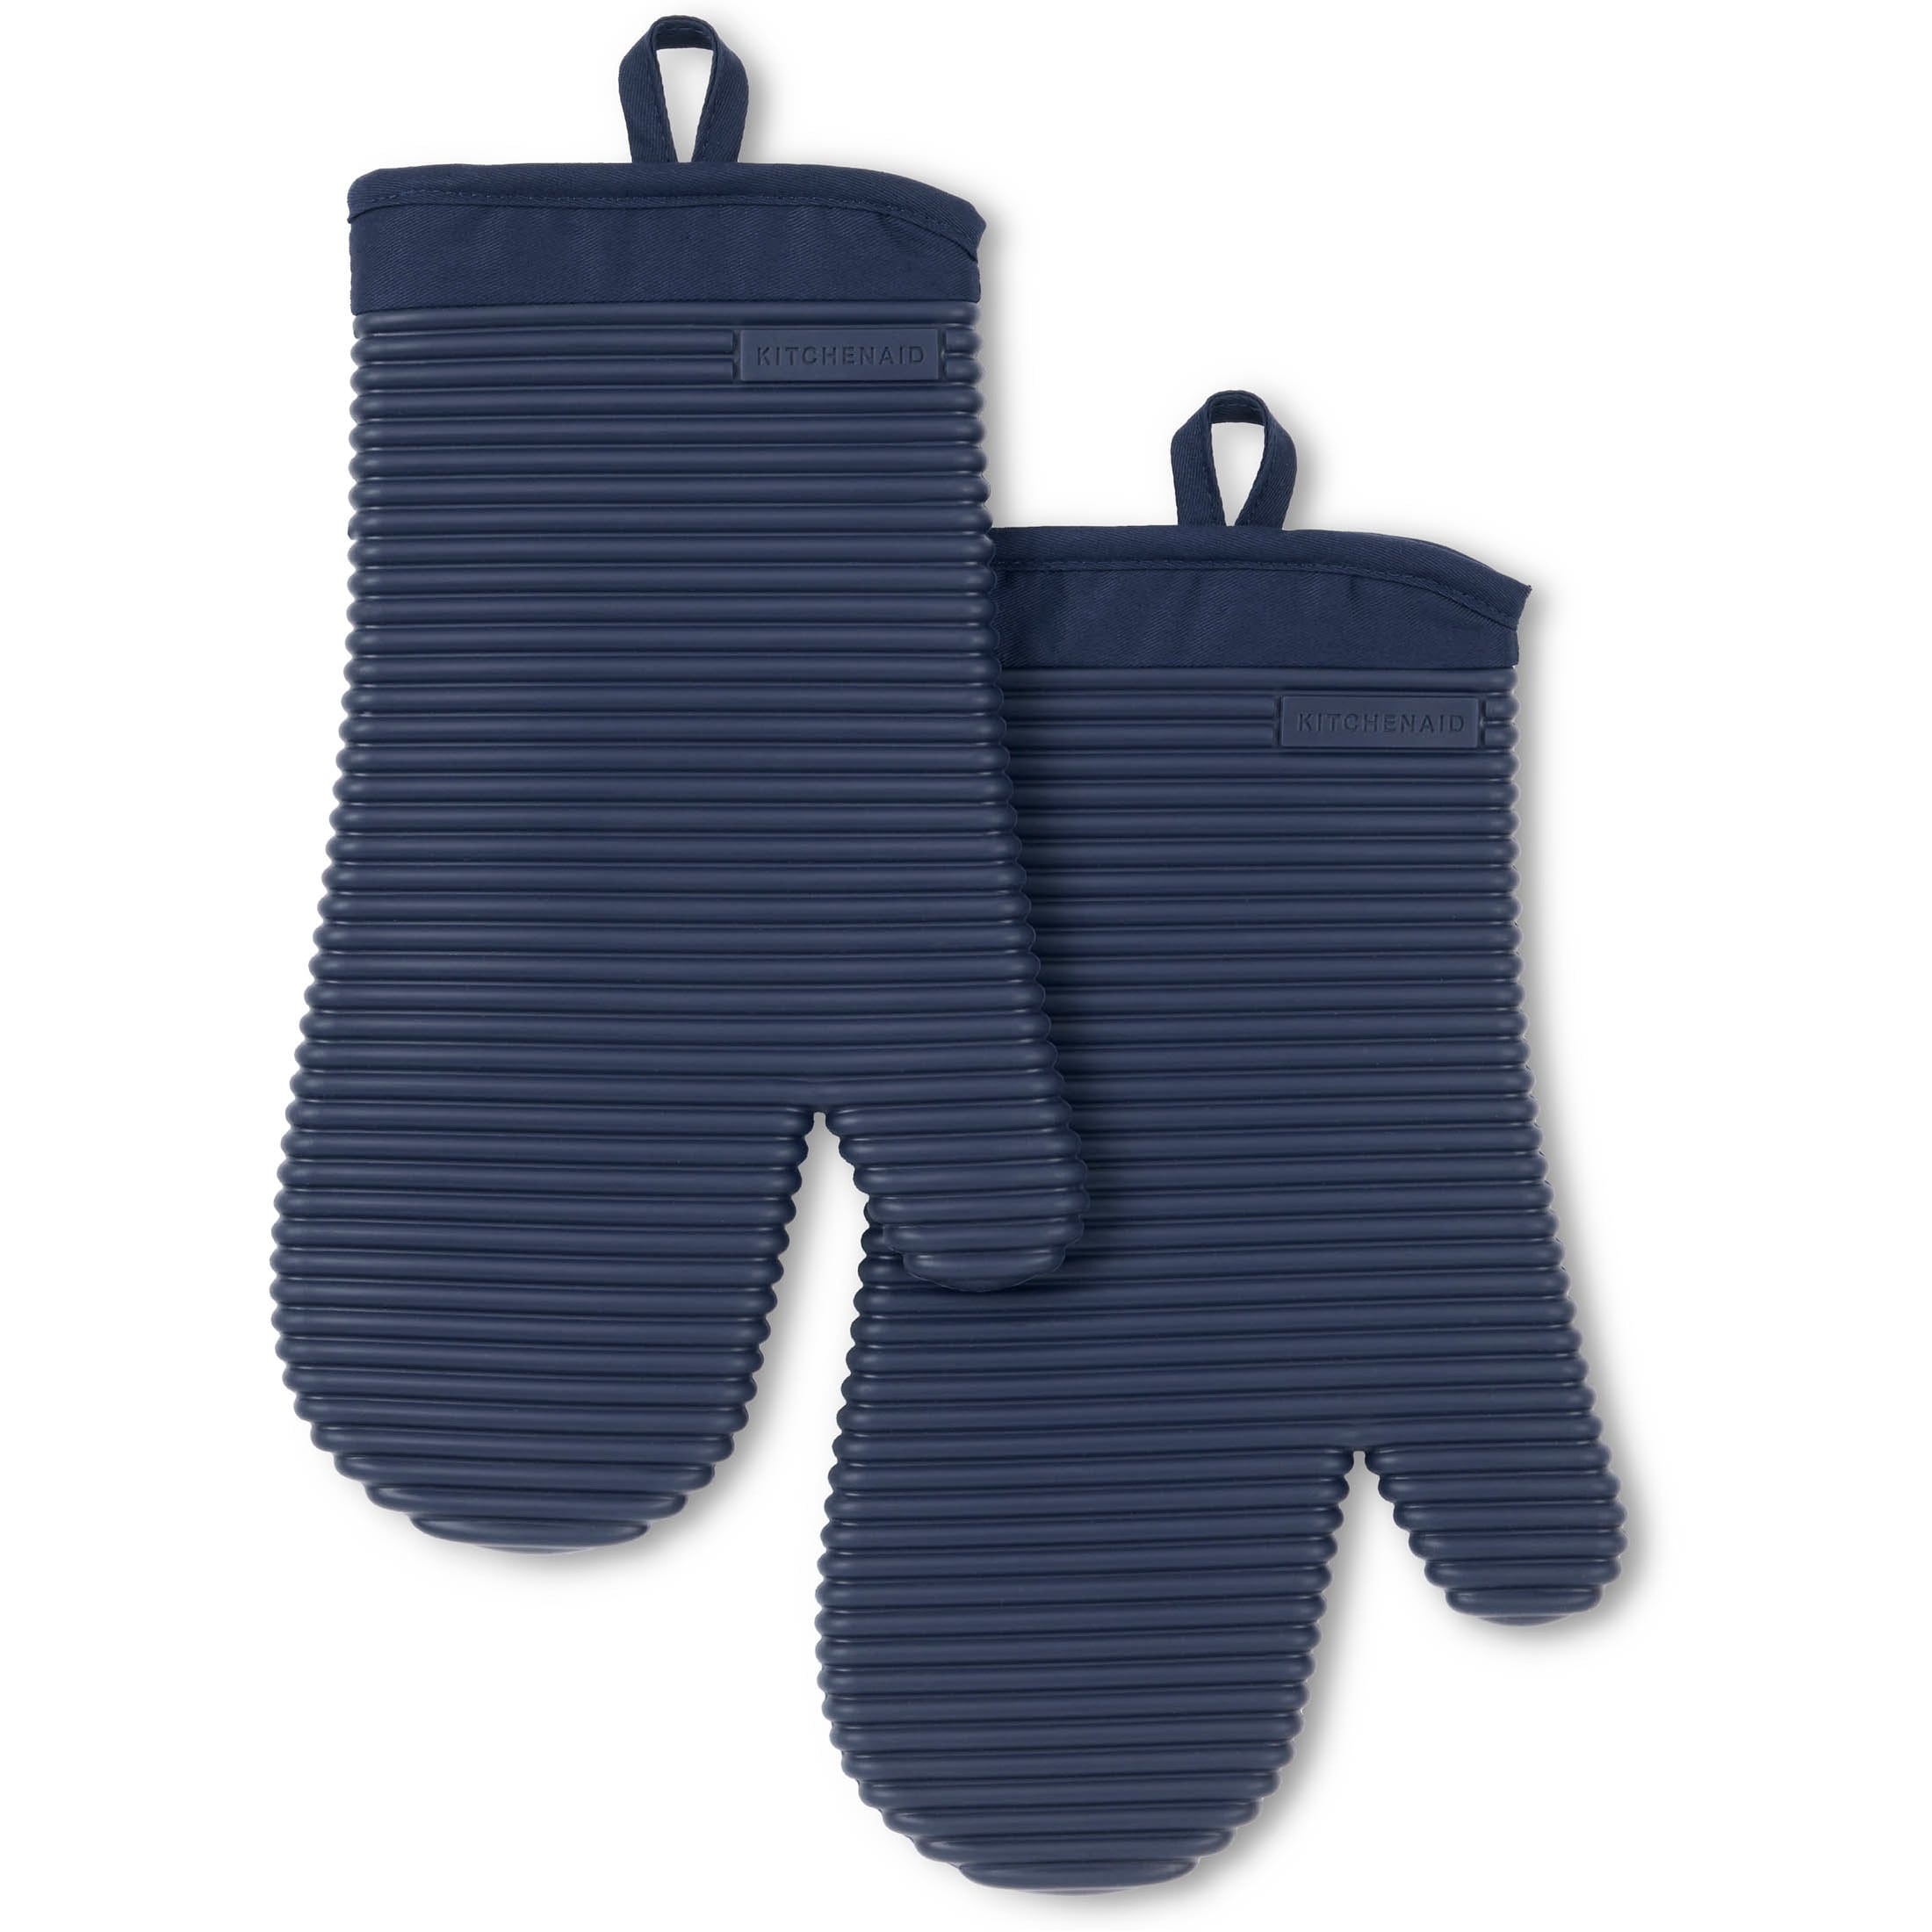 KitchenAid 2-Pack Cotton Solid Any Occasion Oven Mitt Set in the